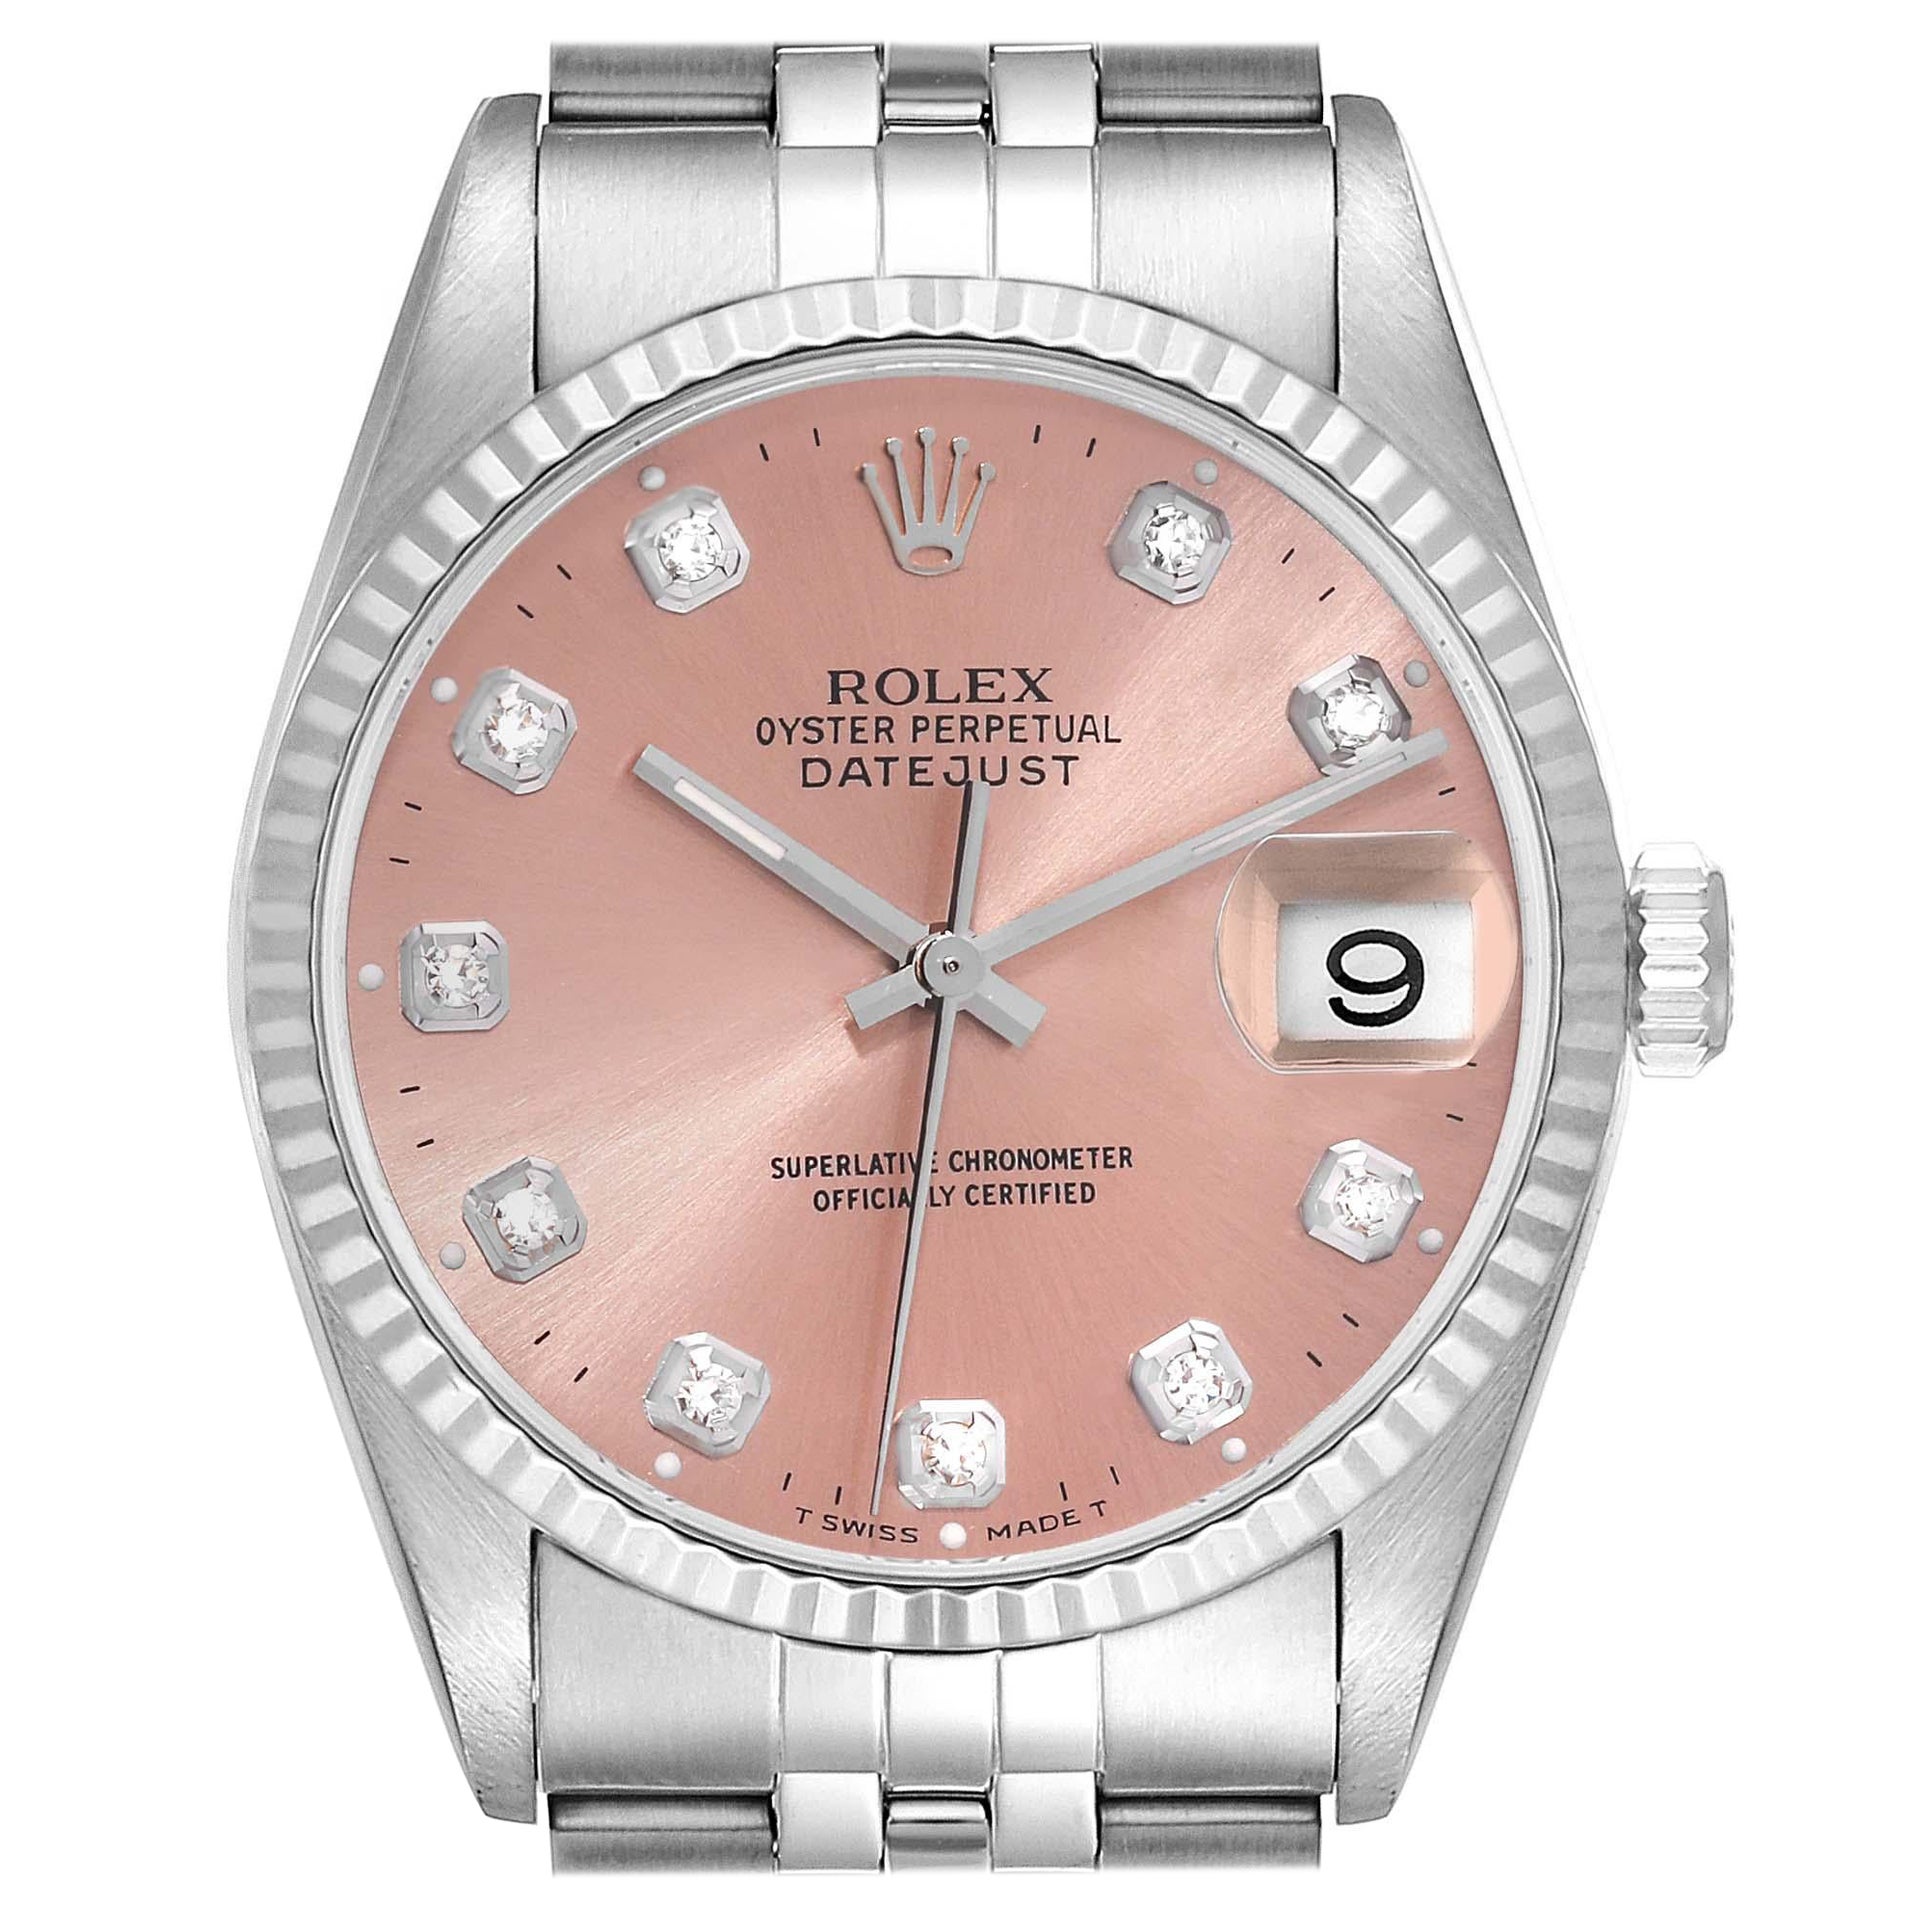 Rolex Datejust Steel White Gold Salmon Diamond Dial Mens Watch 16234 For Sale